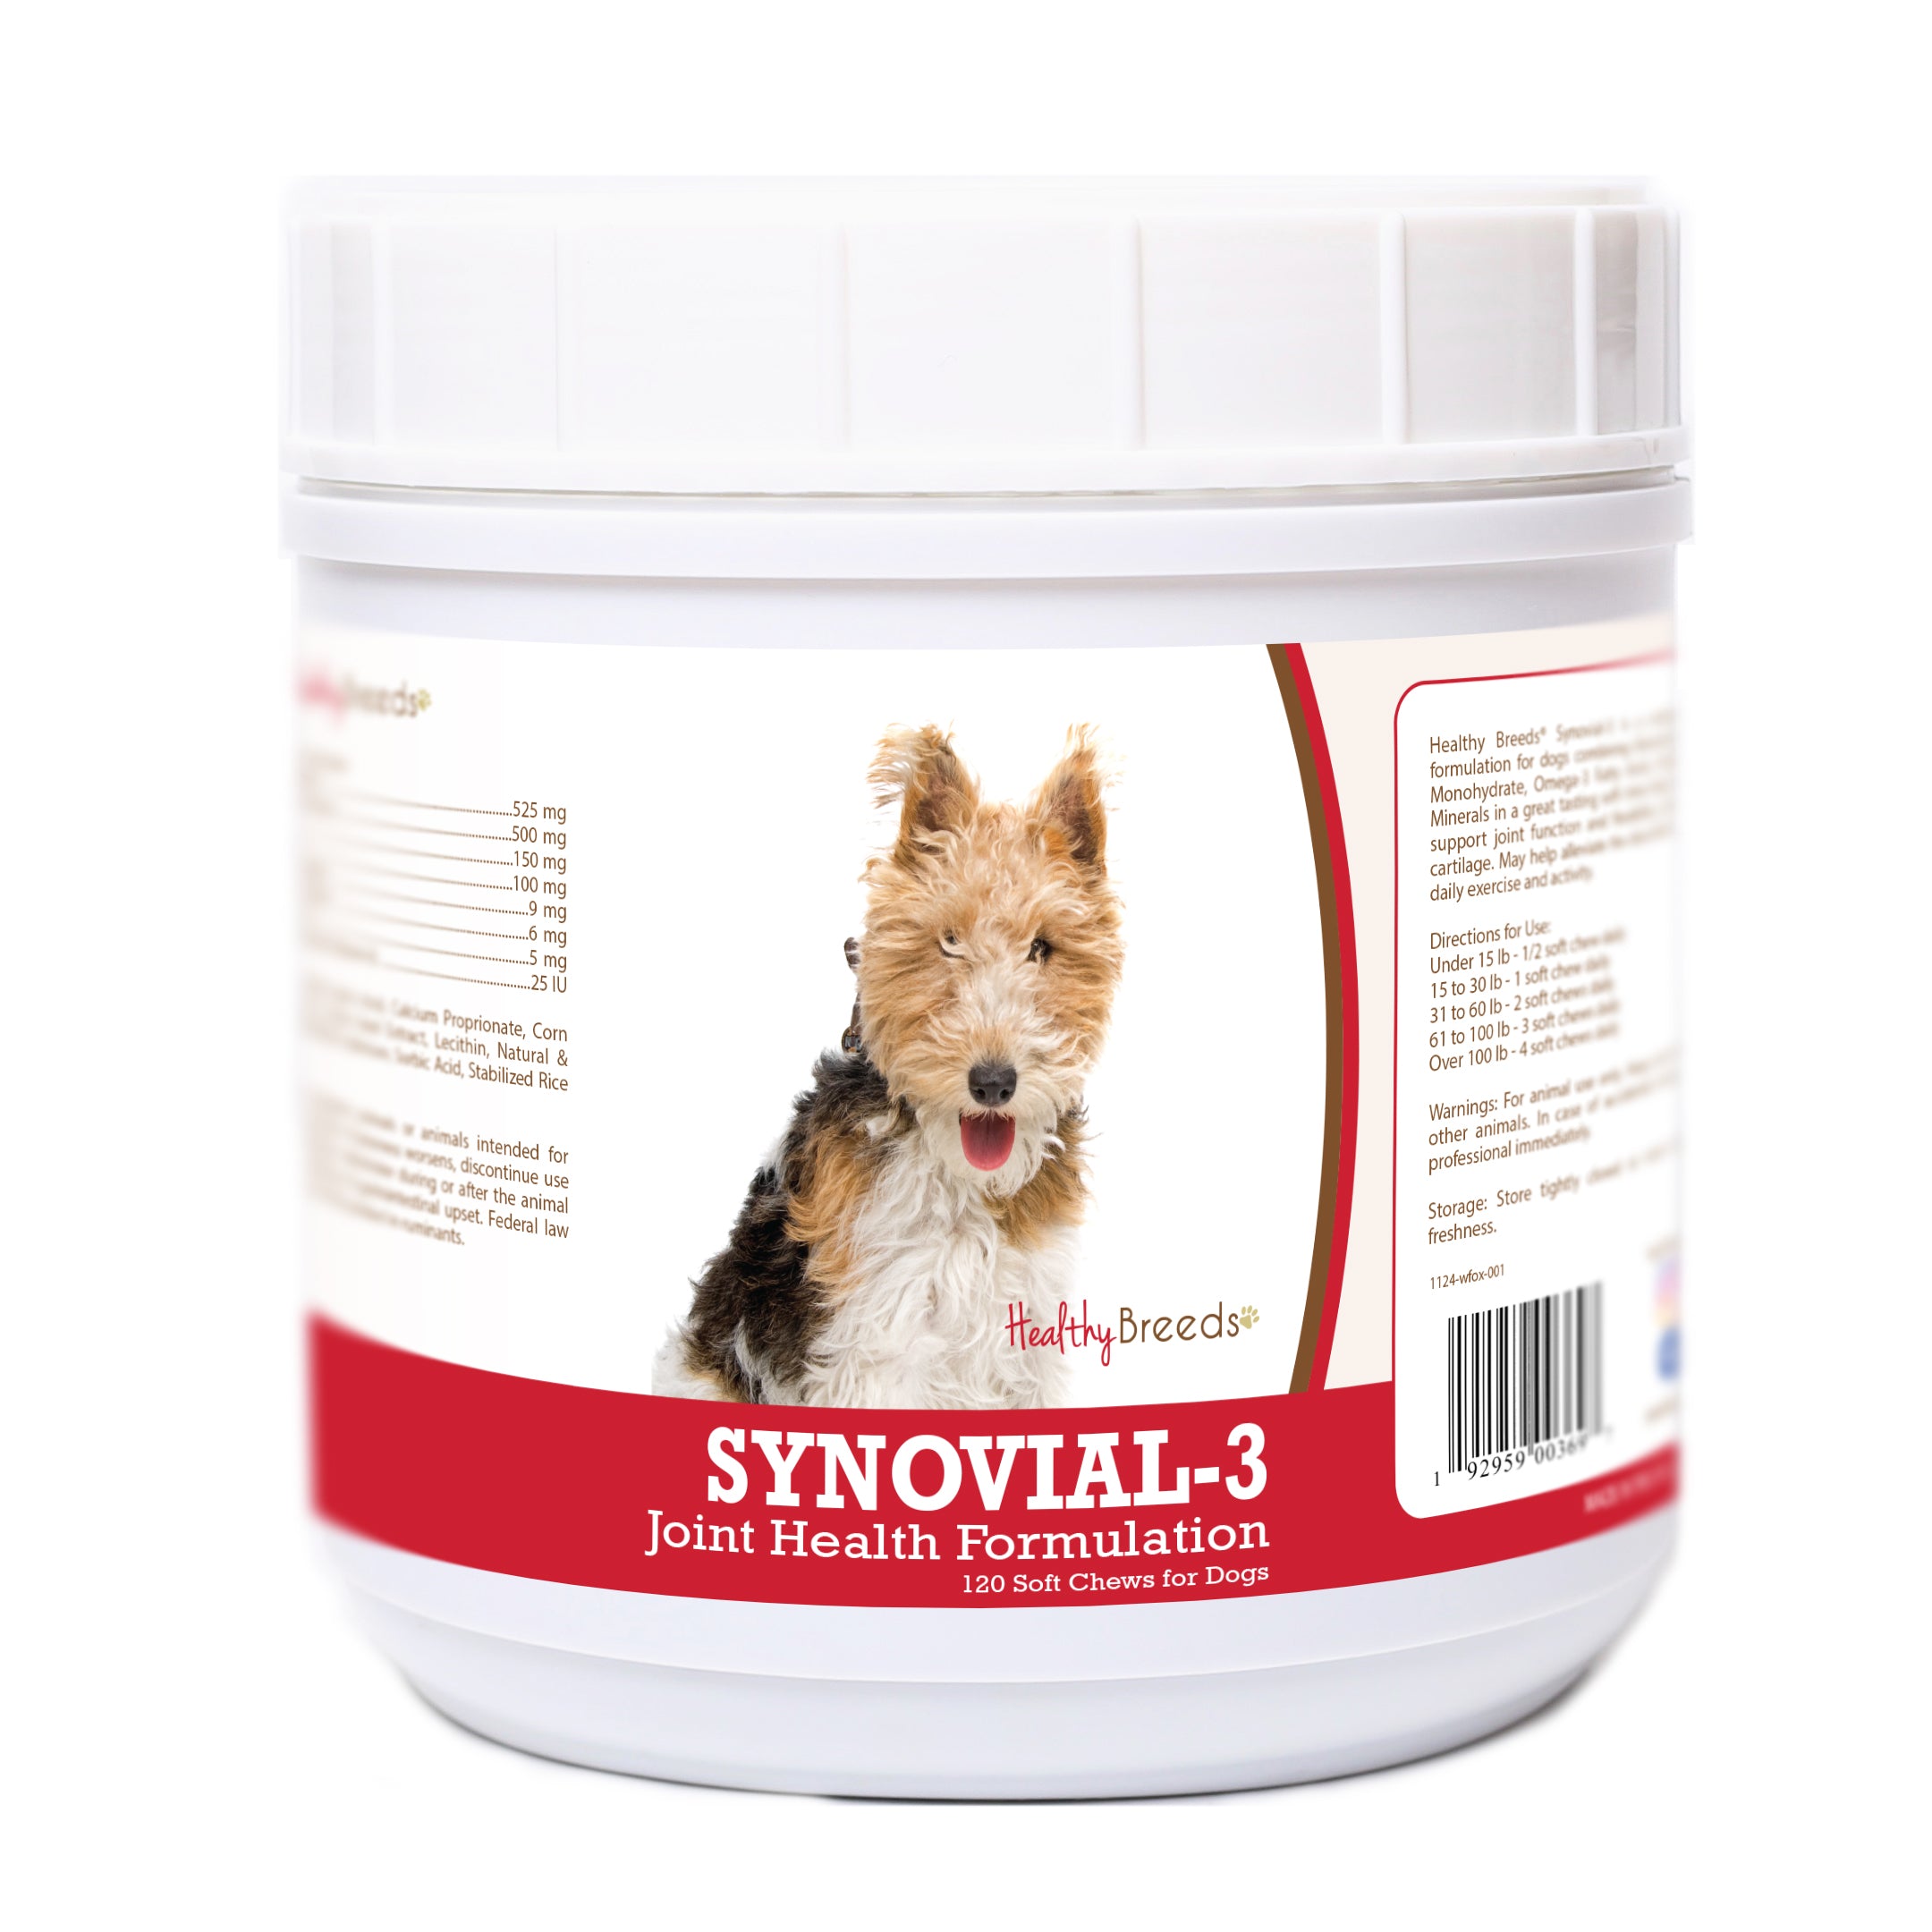 Wire Fox Terrier Synovial-3 Joint Health Formulation Soft Chews 120 Count